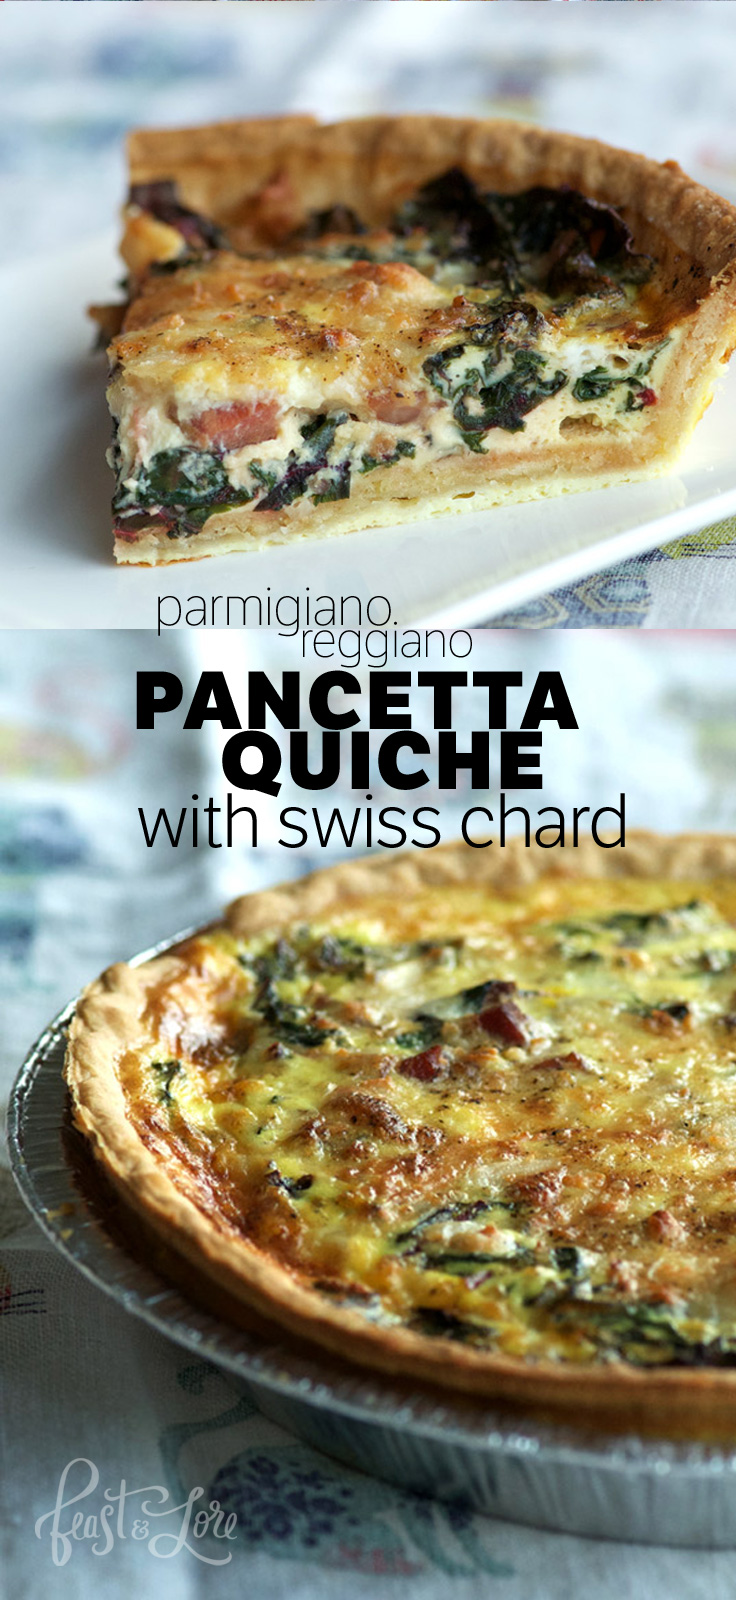 Crisp Pancetta with Swiss Chard makes for a delicious quiche!